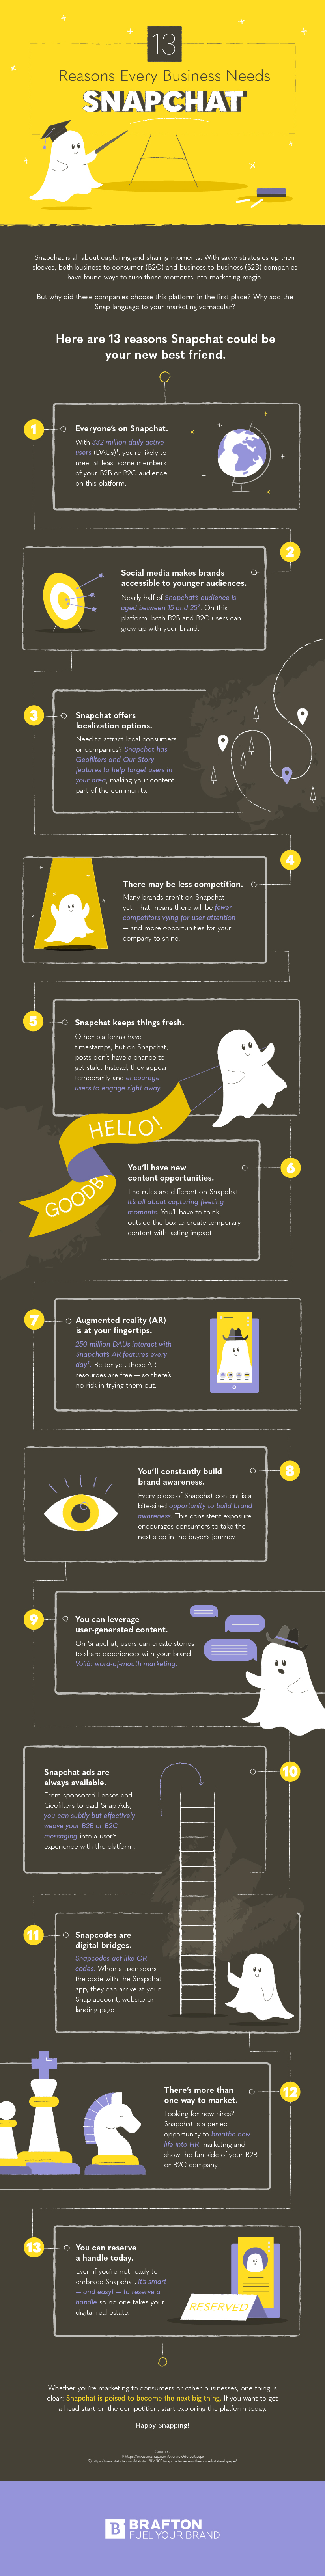 13 Reasons Every Business Needs Snapchat - Infographic